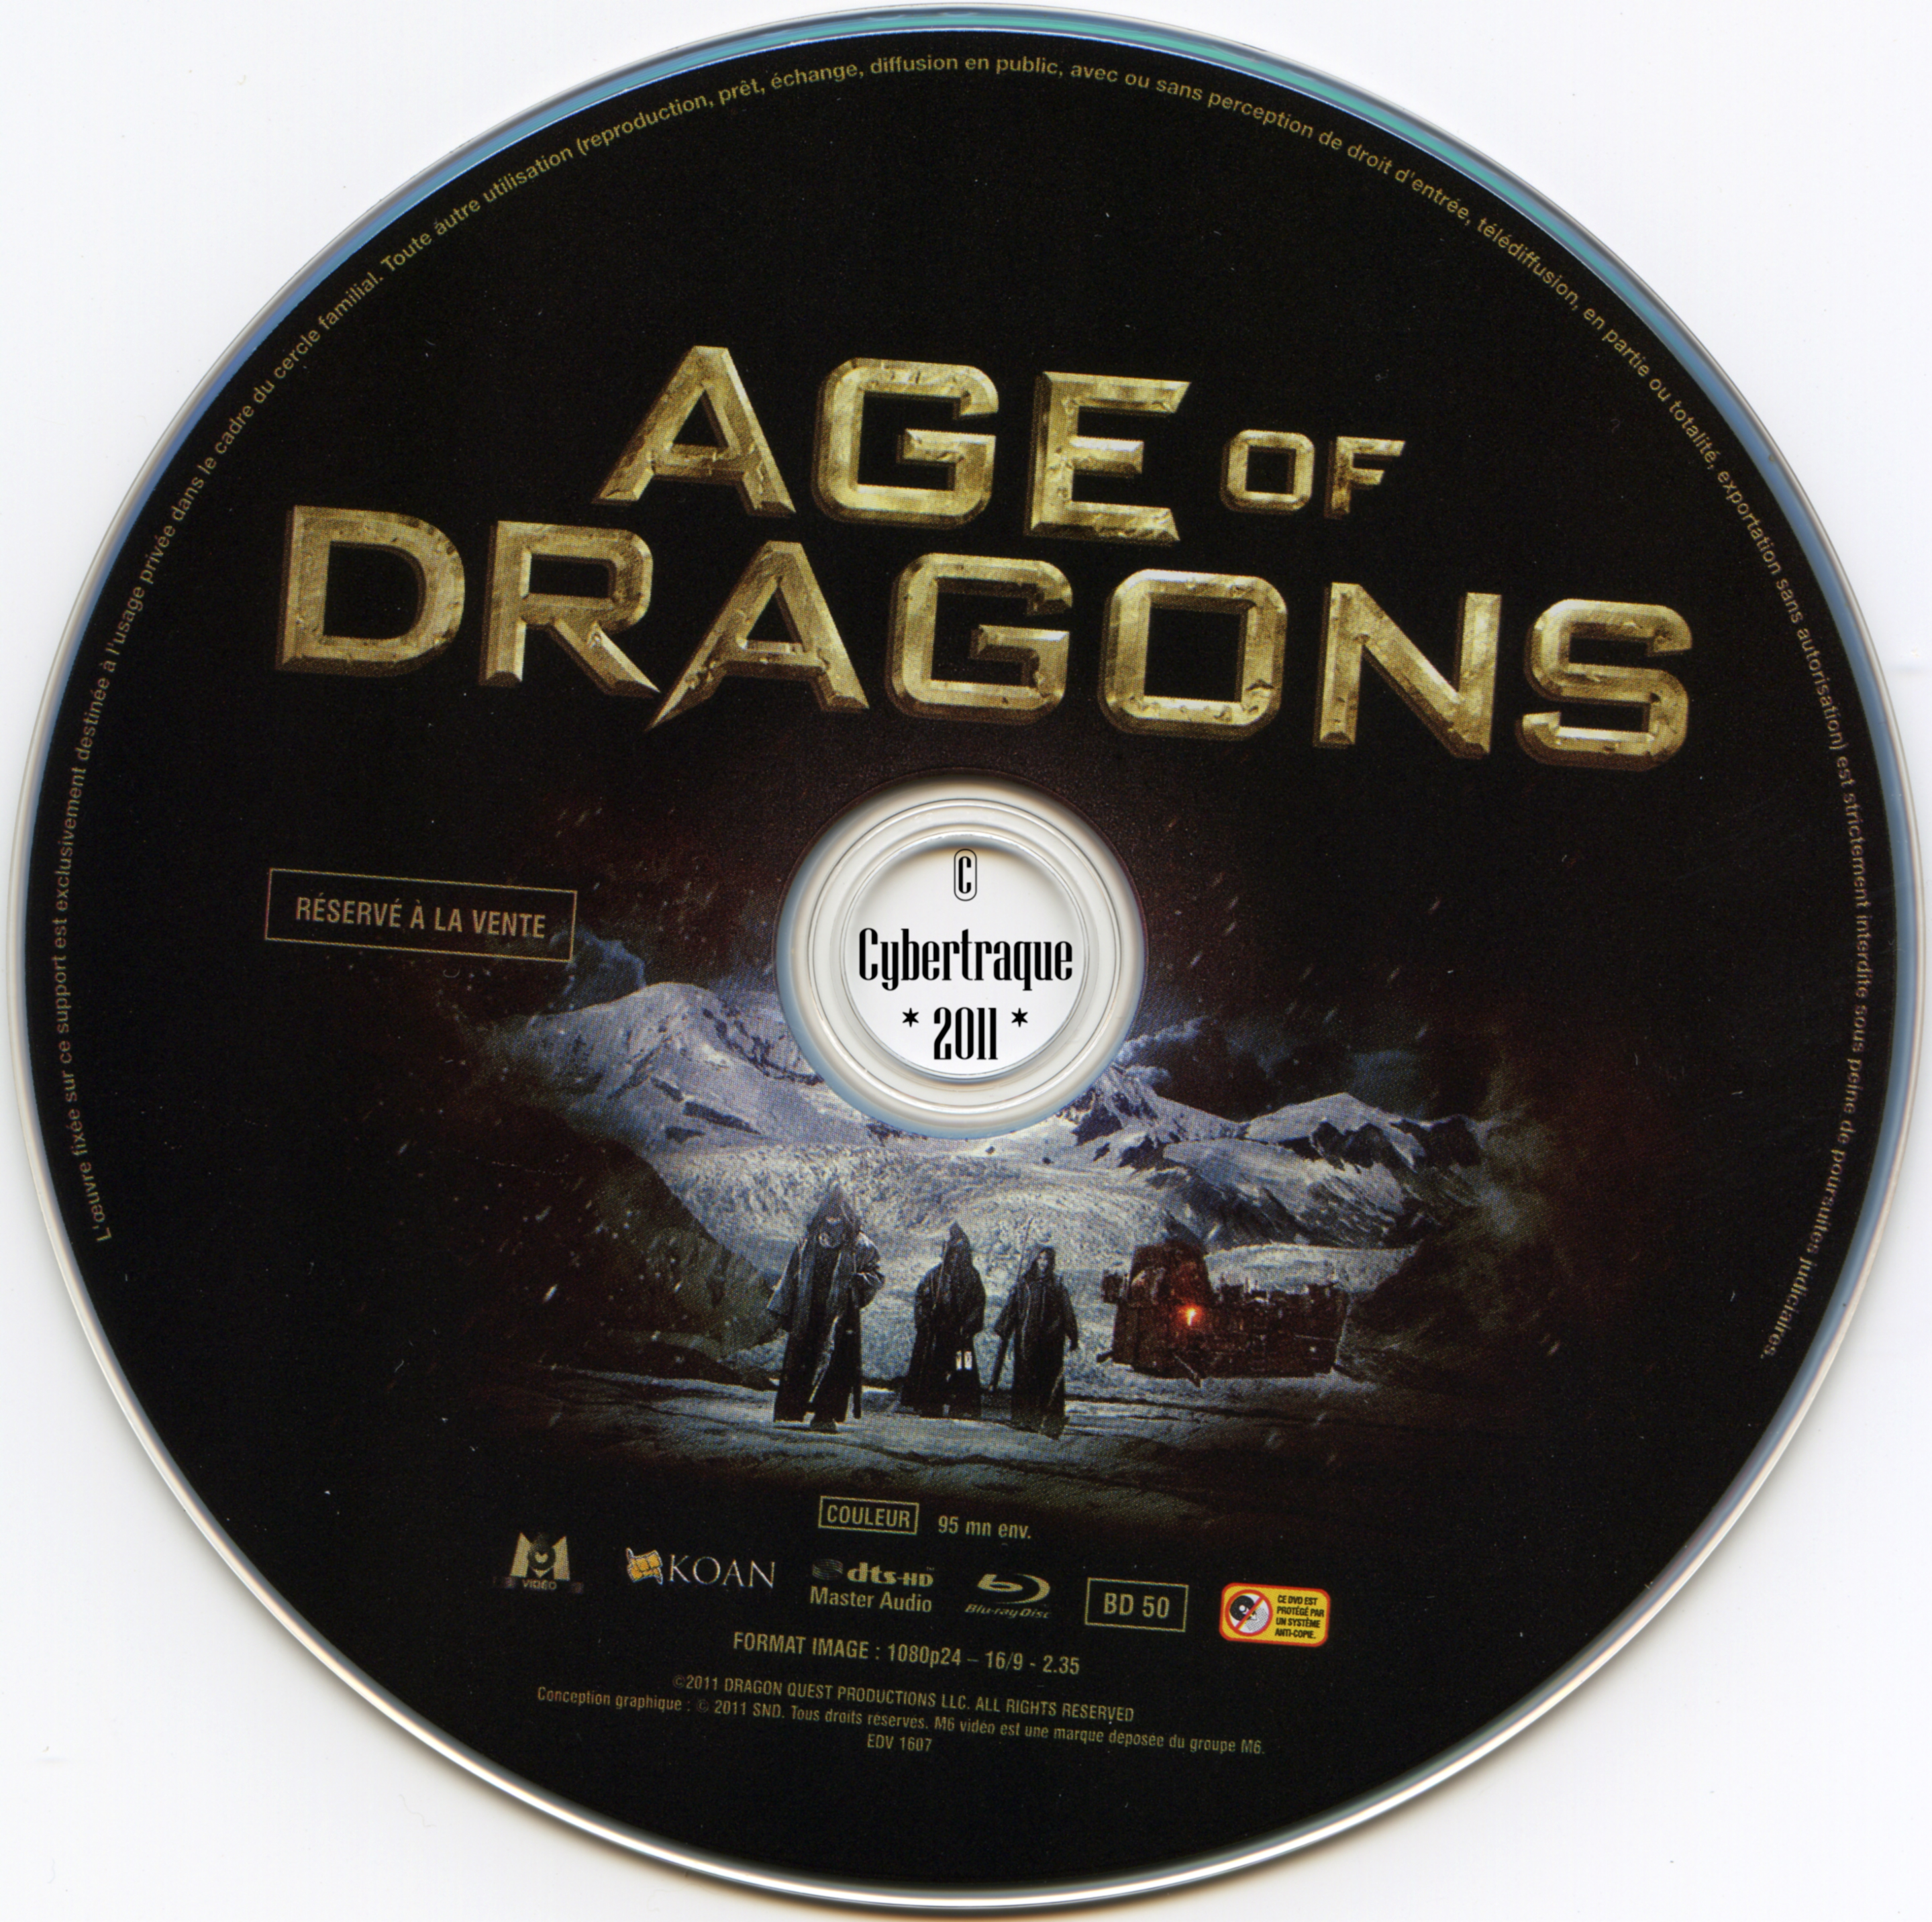 Age of dragons (BLU-RAY)